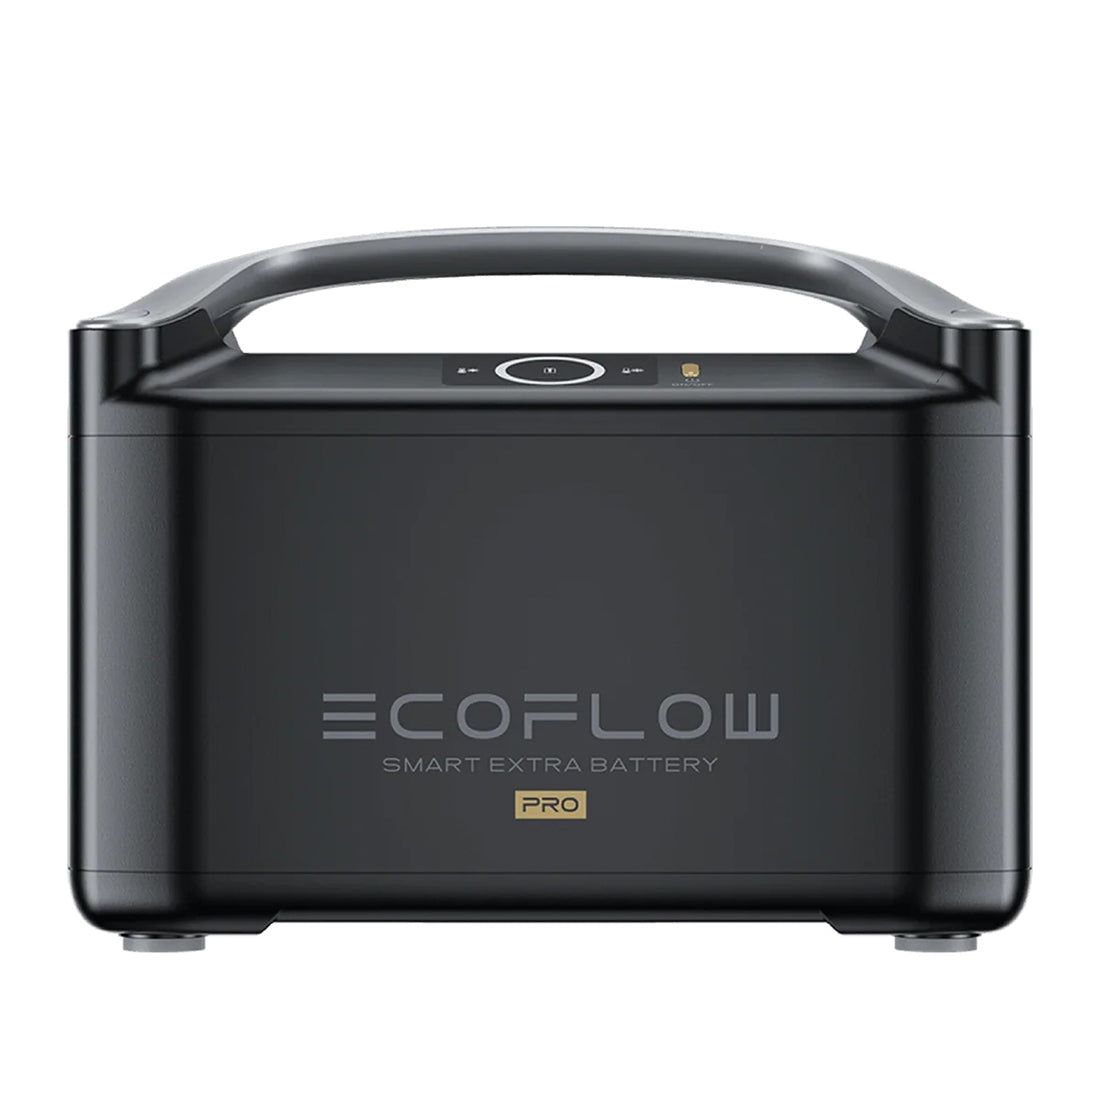 Ecoflow Smart Extra Battery for River Pro Power Station